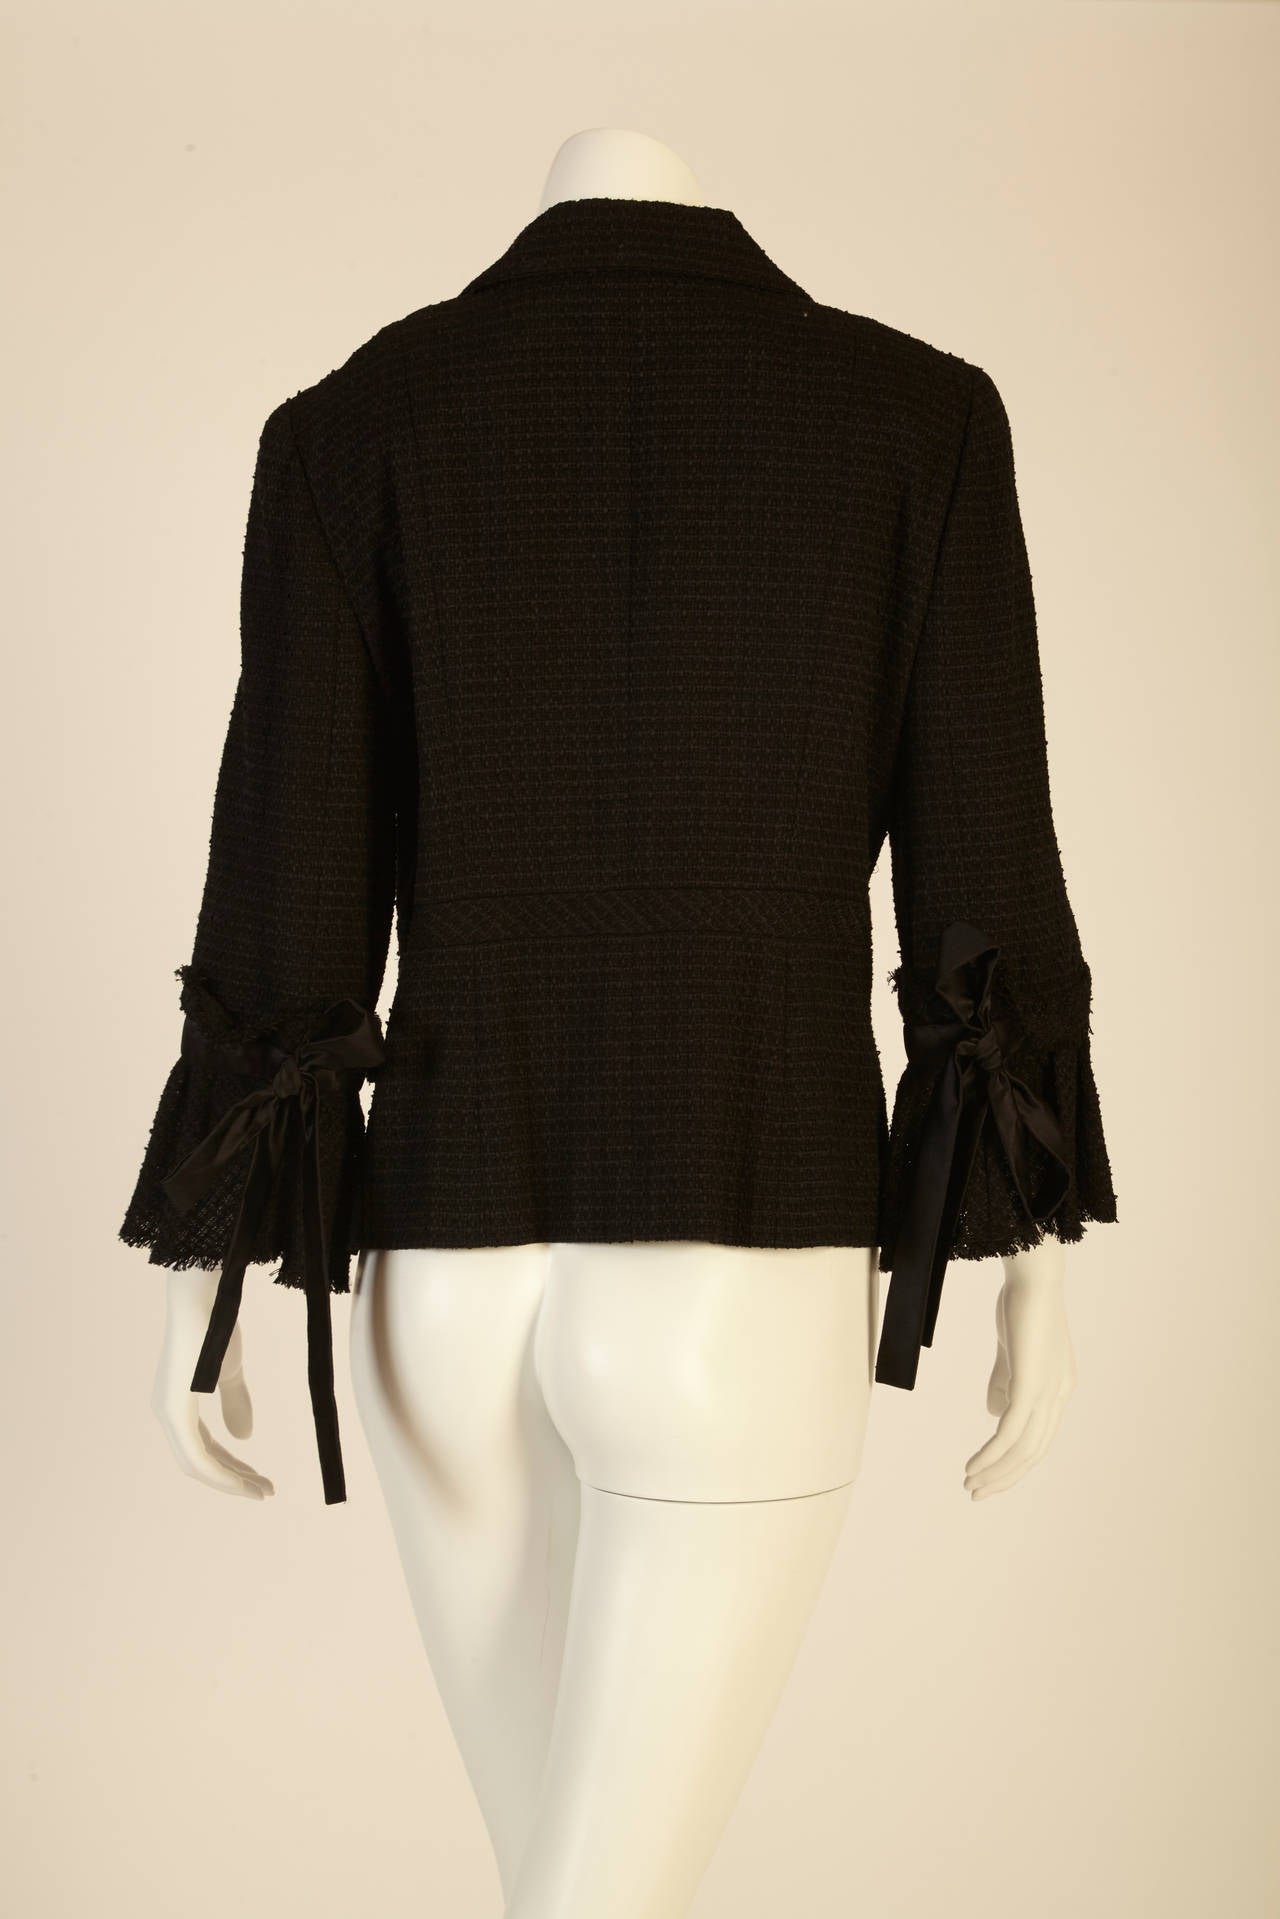 2009 Chanel Black Jacket with Bows In Excellent Condition In New York, NY